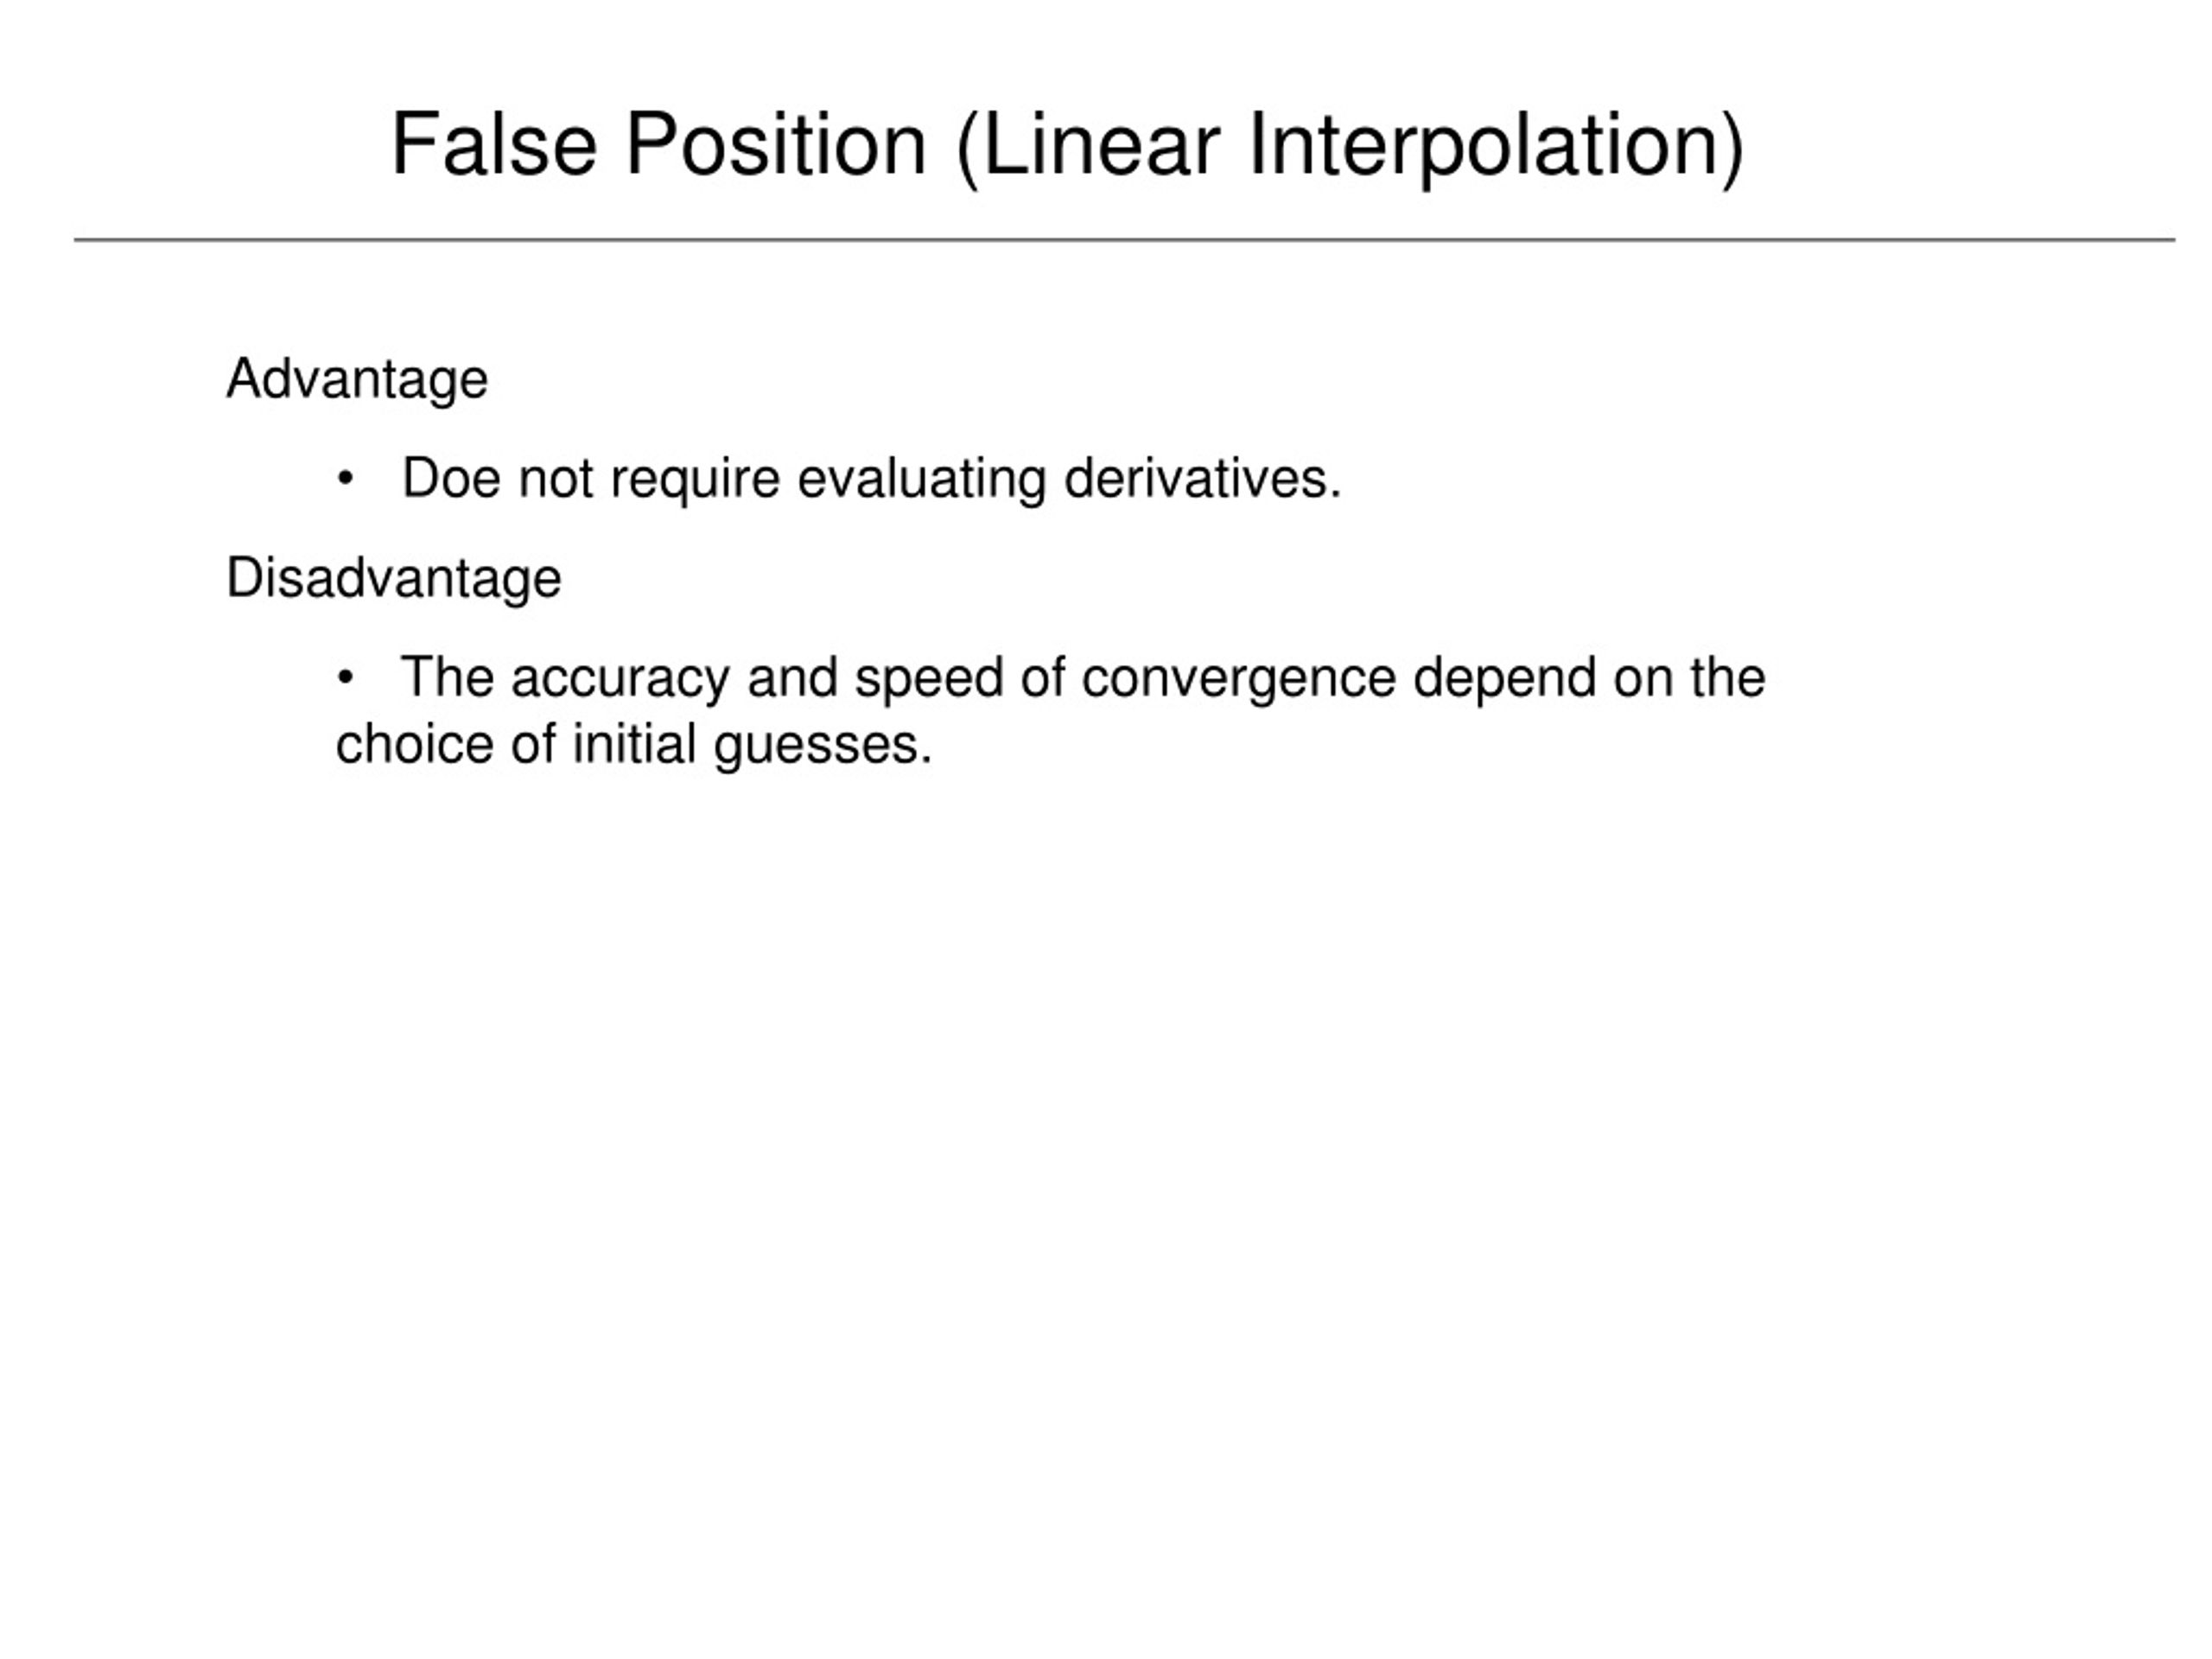 linear interpolation advantages and disadvantages